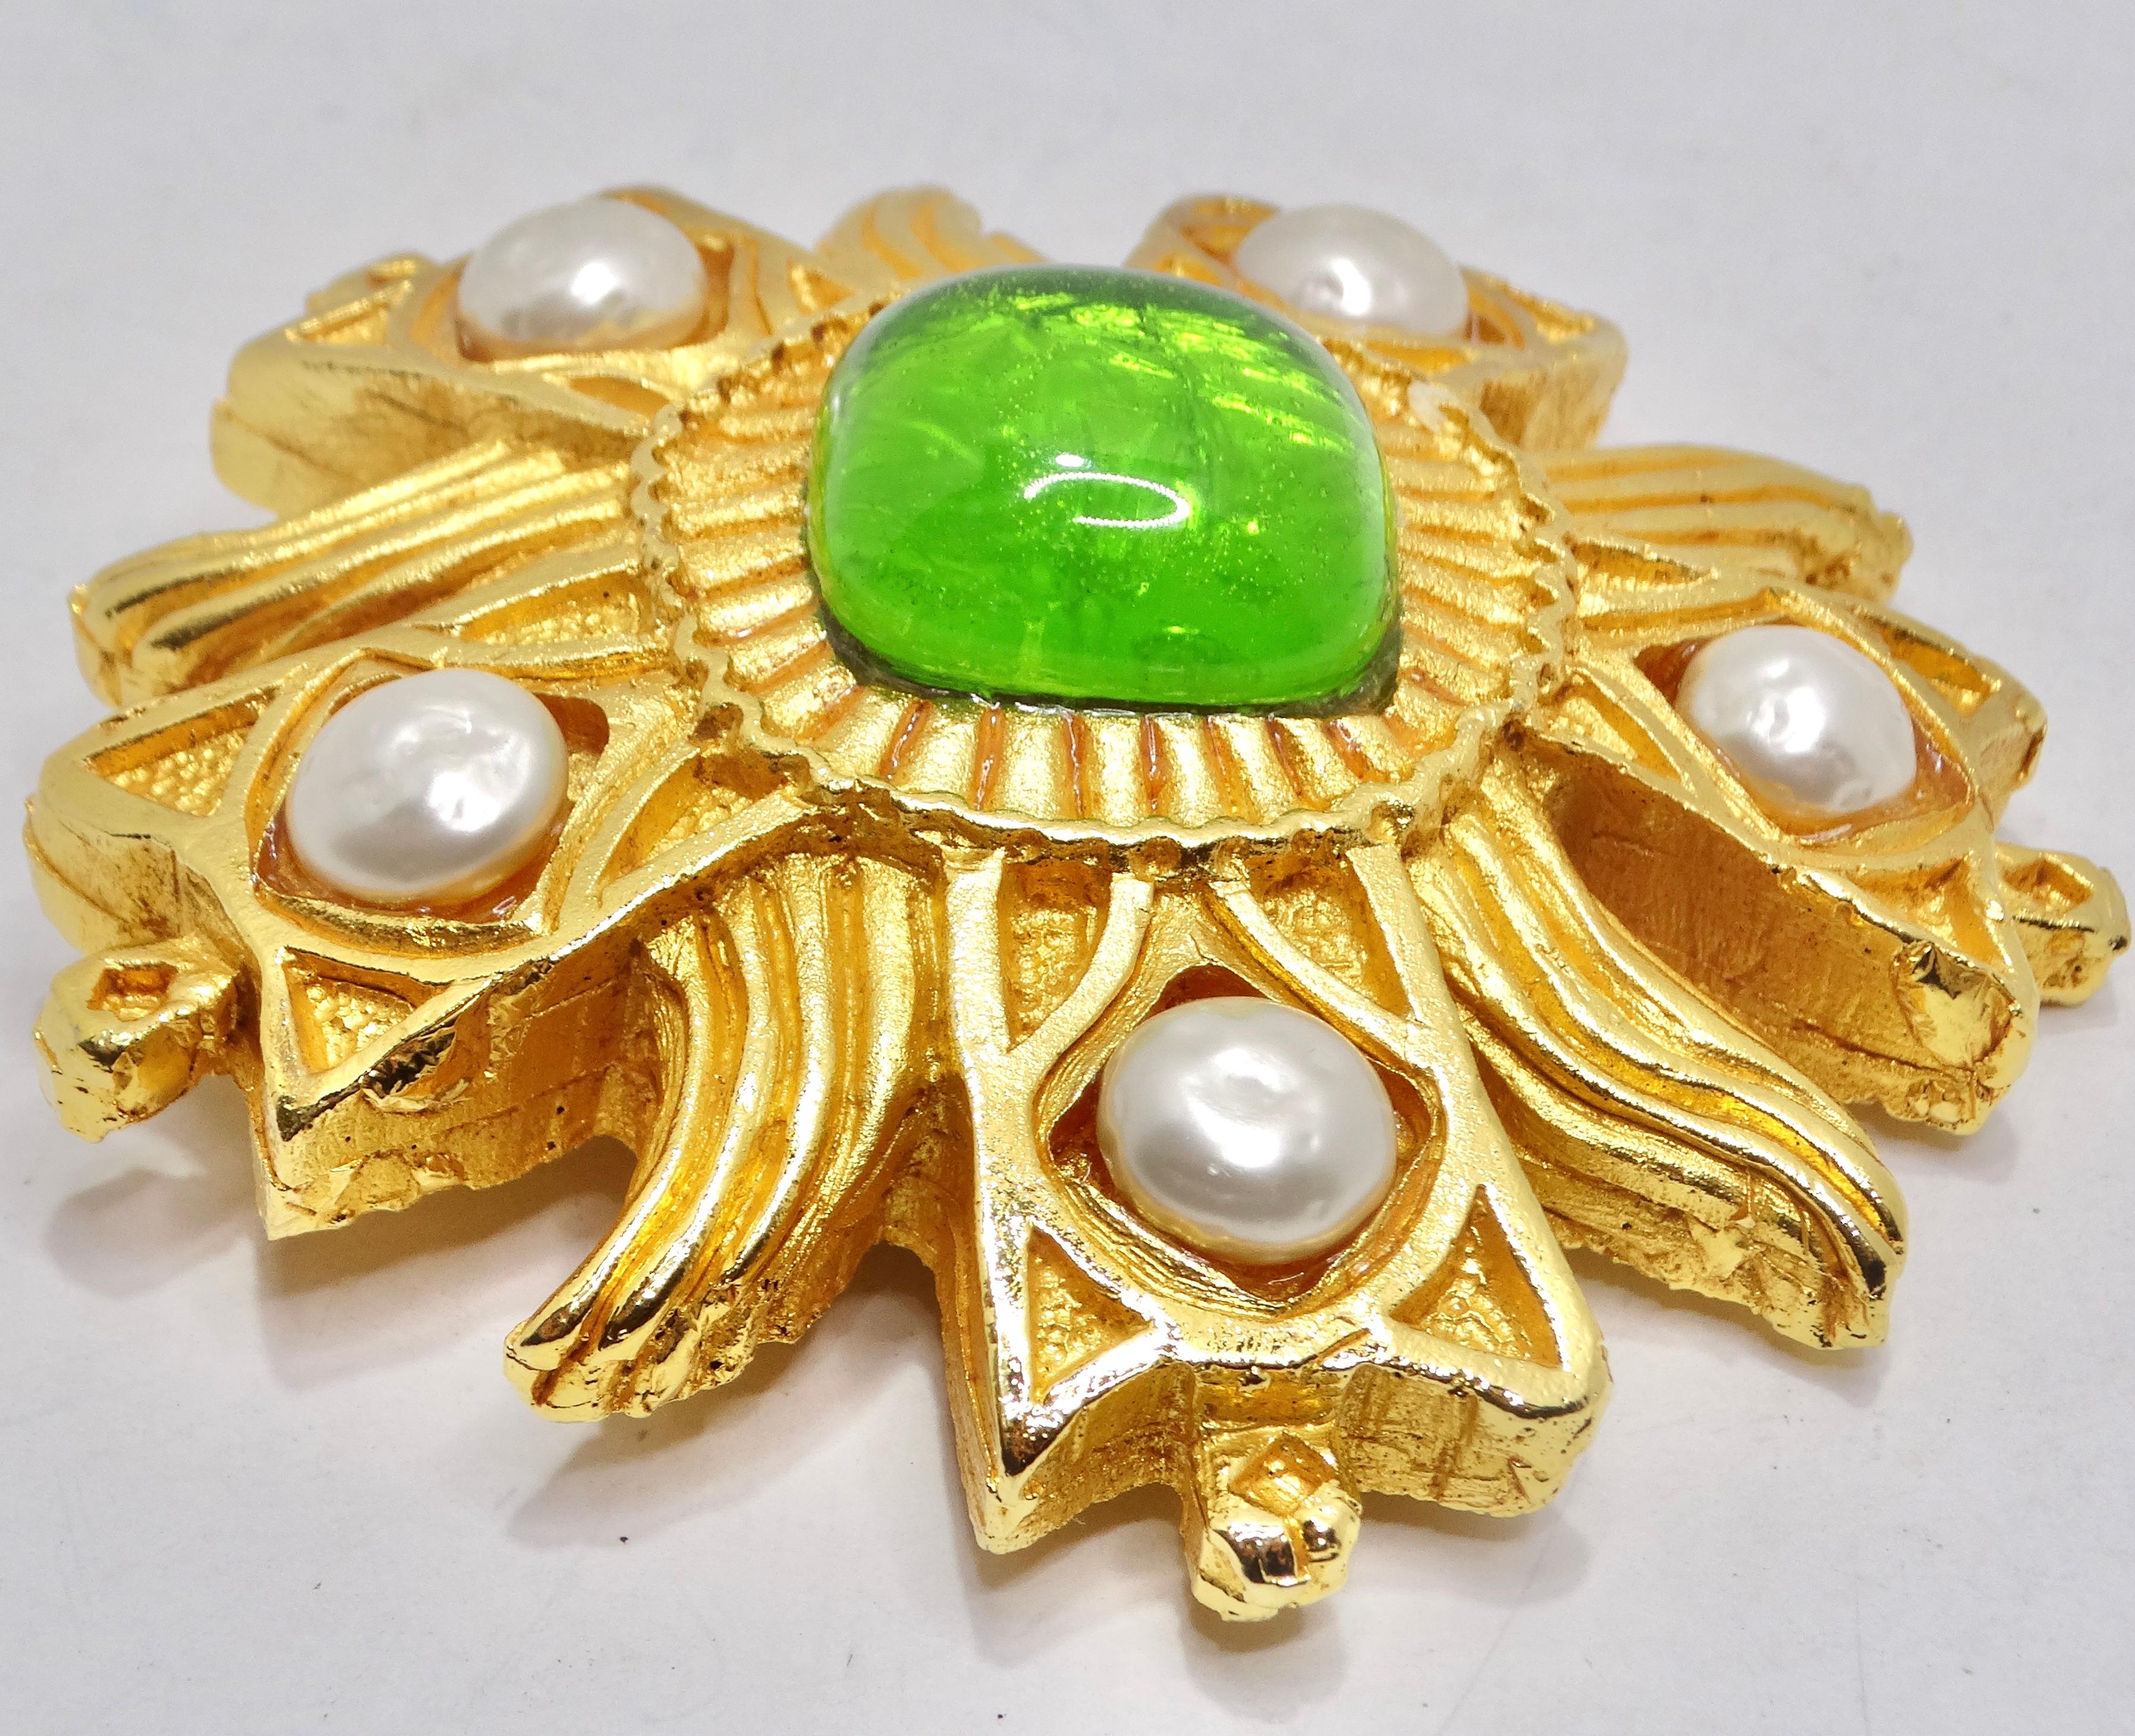 Dominique Aurientis Paris 1980s Gold Plated Green Stone Flower Brooch In Excellent Condition For Sale In Scottsdale, AZ